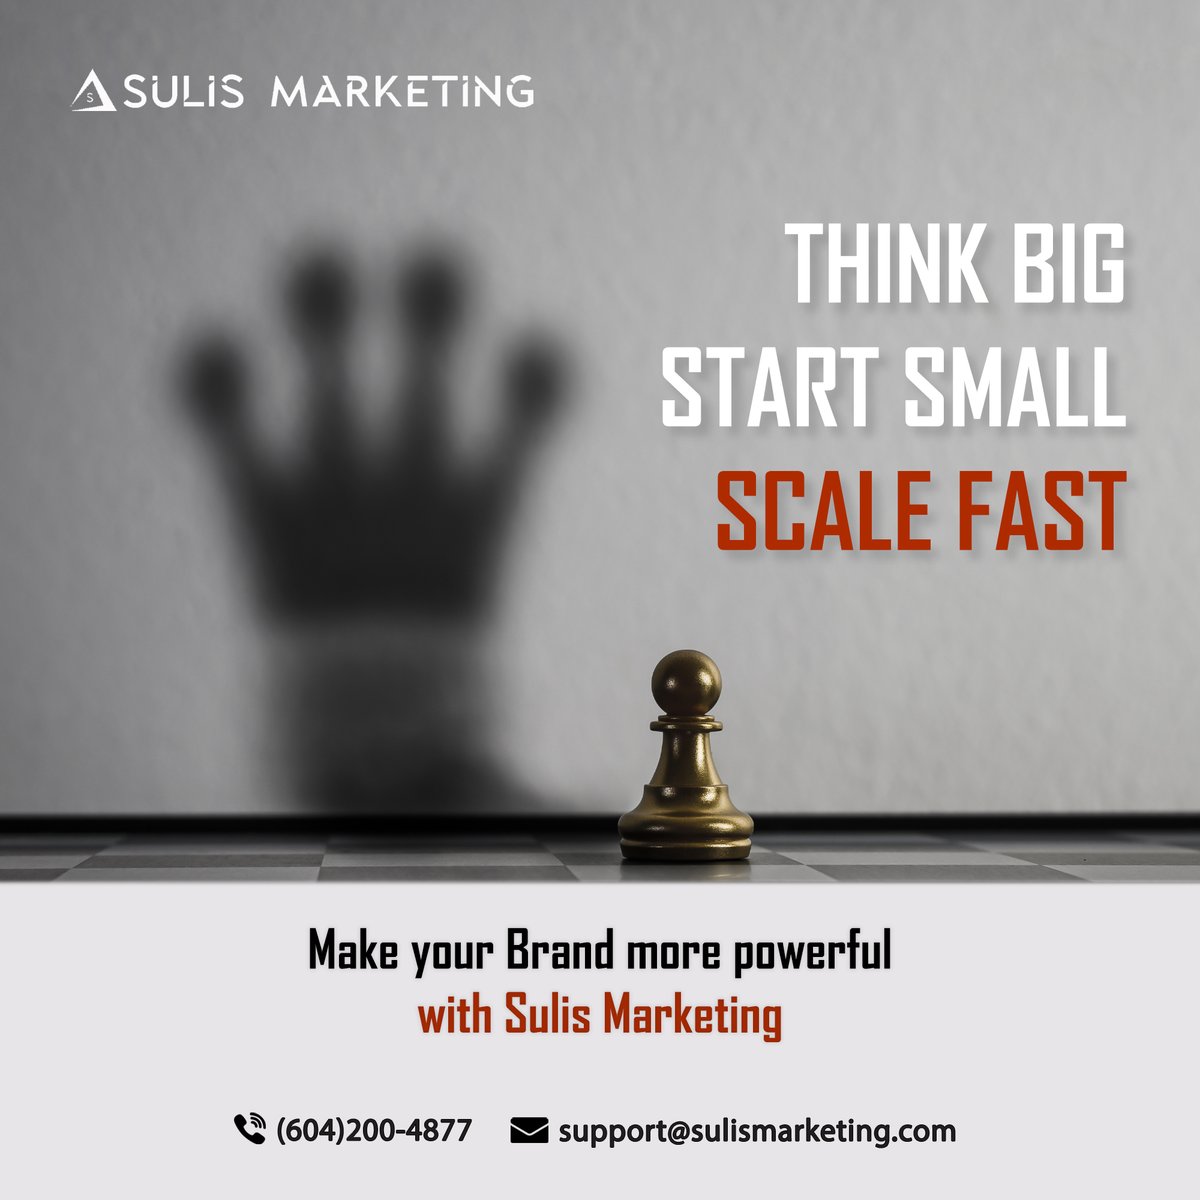 'Think big start small scale fast'
Make your brand more powerful with Sulis Marketing
#ThinkBig #startsmall #scalefast #brand #powerful #webdevelopment #webdevelopmentcanada #webdesign #webdesigncanada #business #businessideas #businessonline